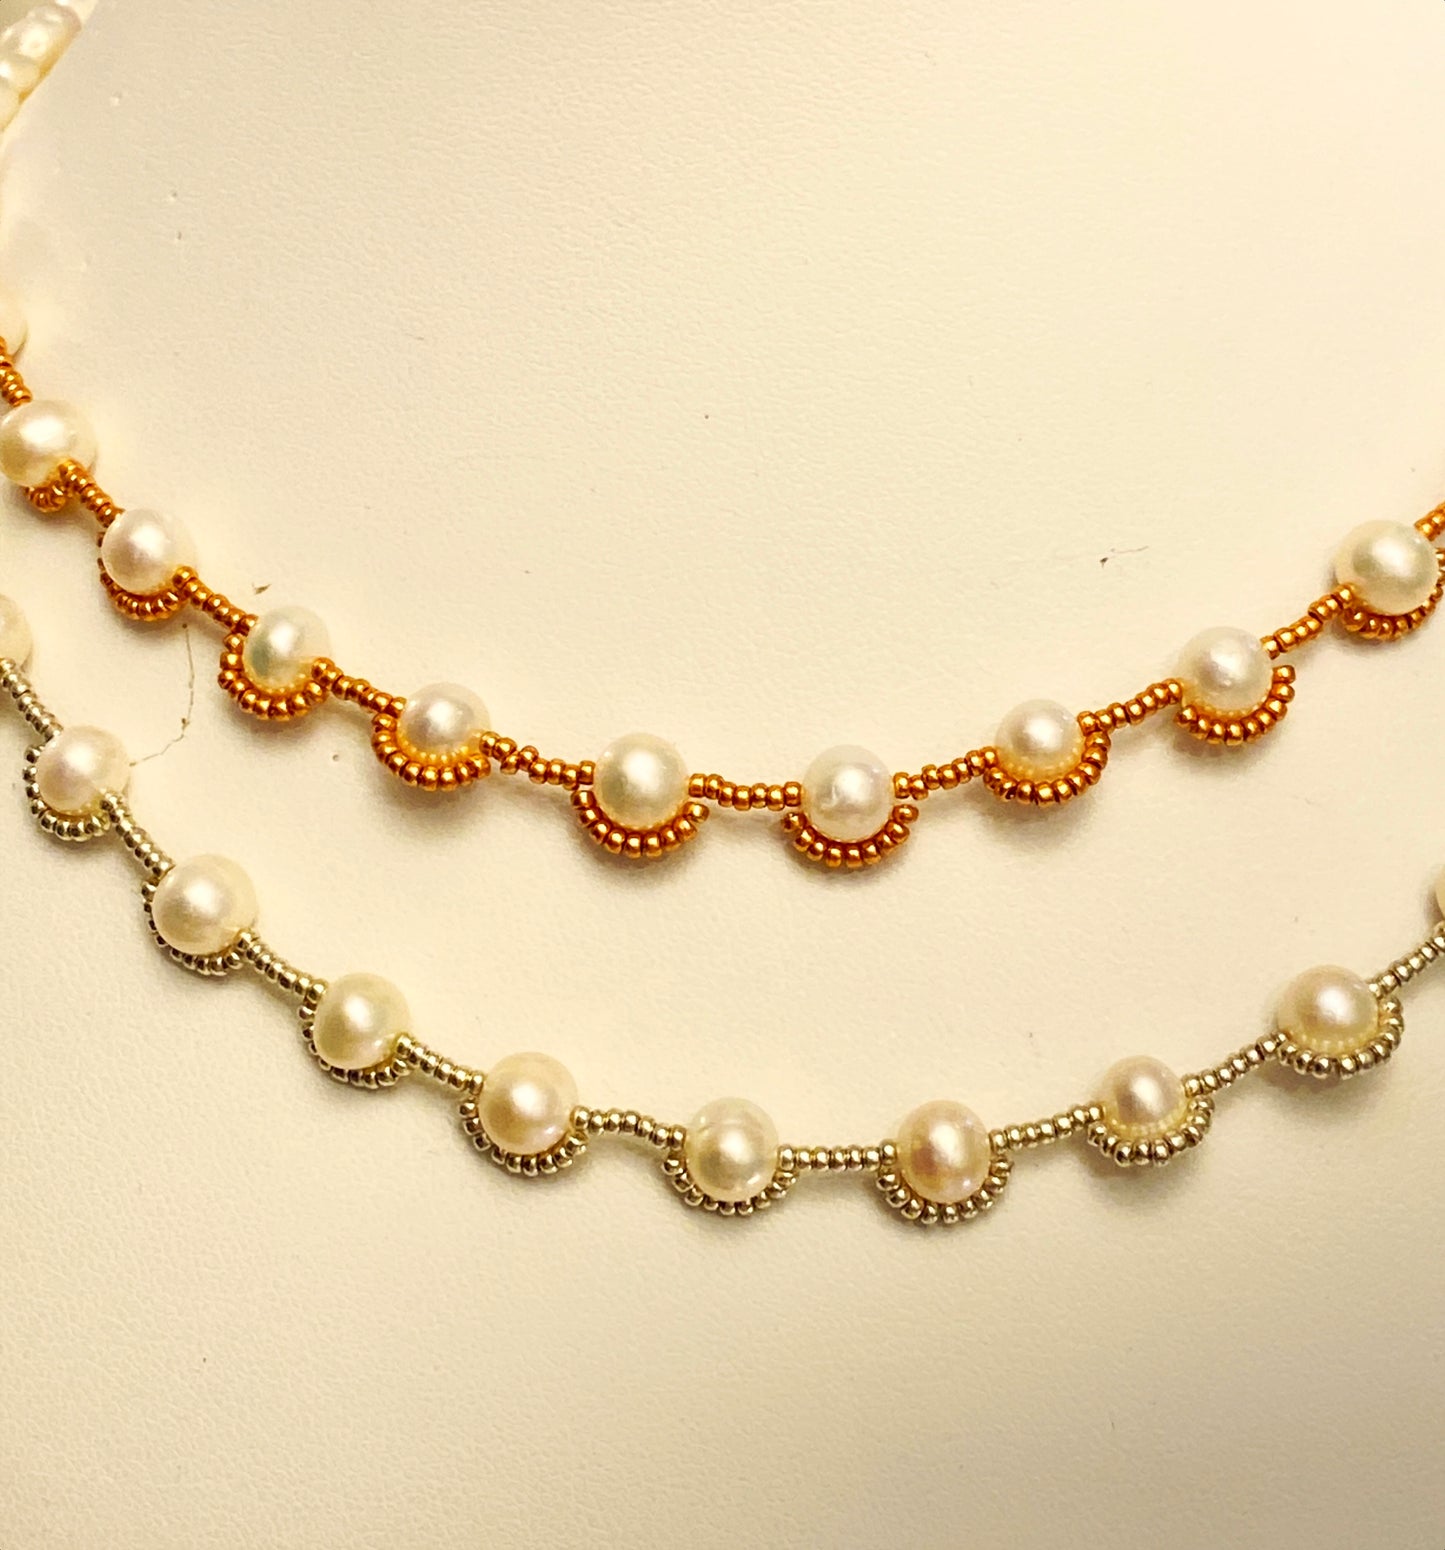 Delicate pearl necklaces with choice of seed beads